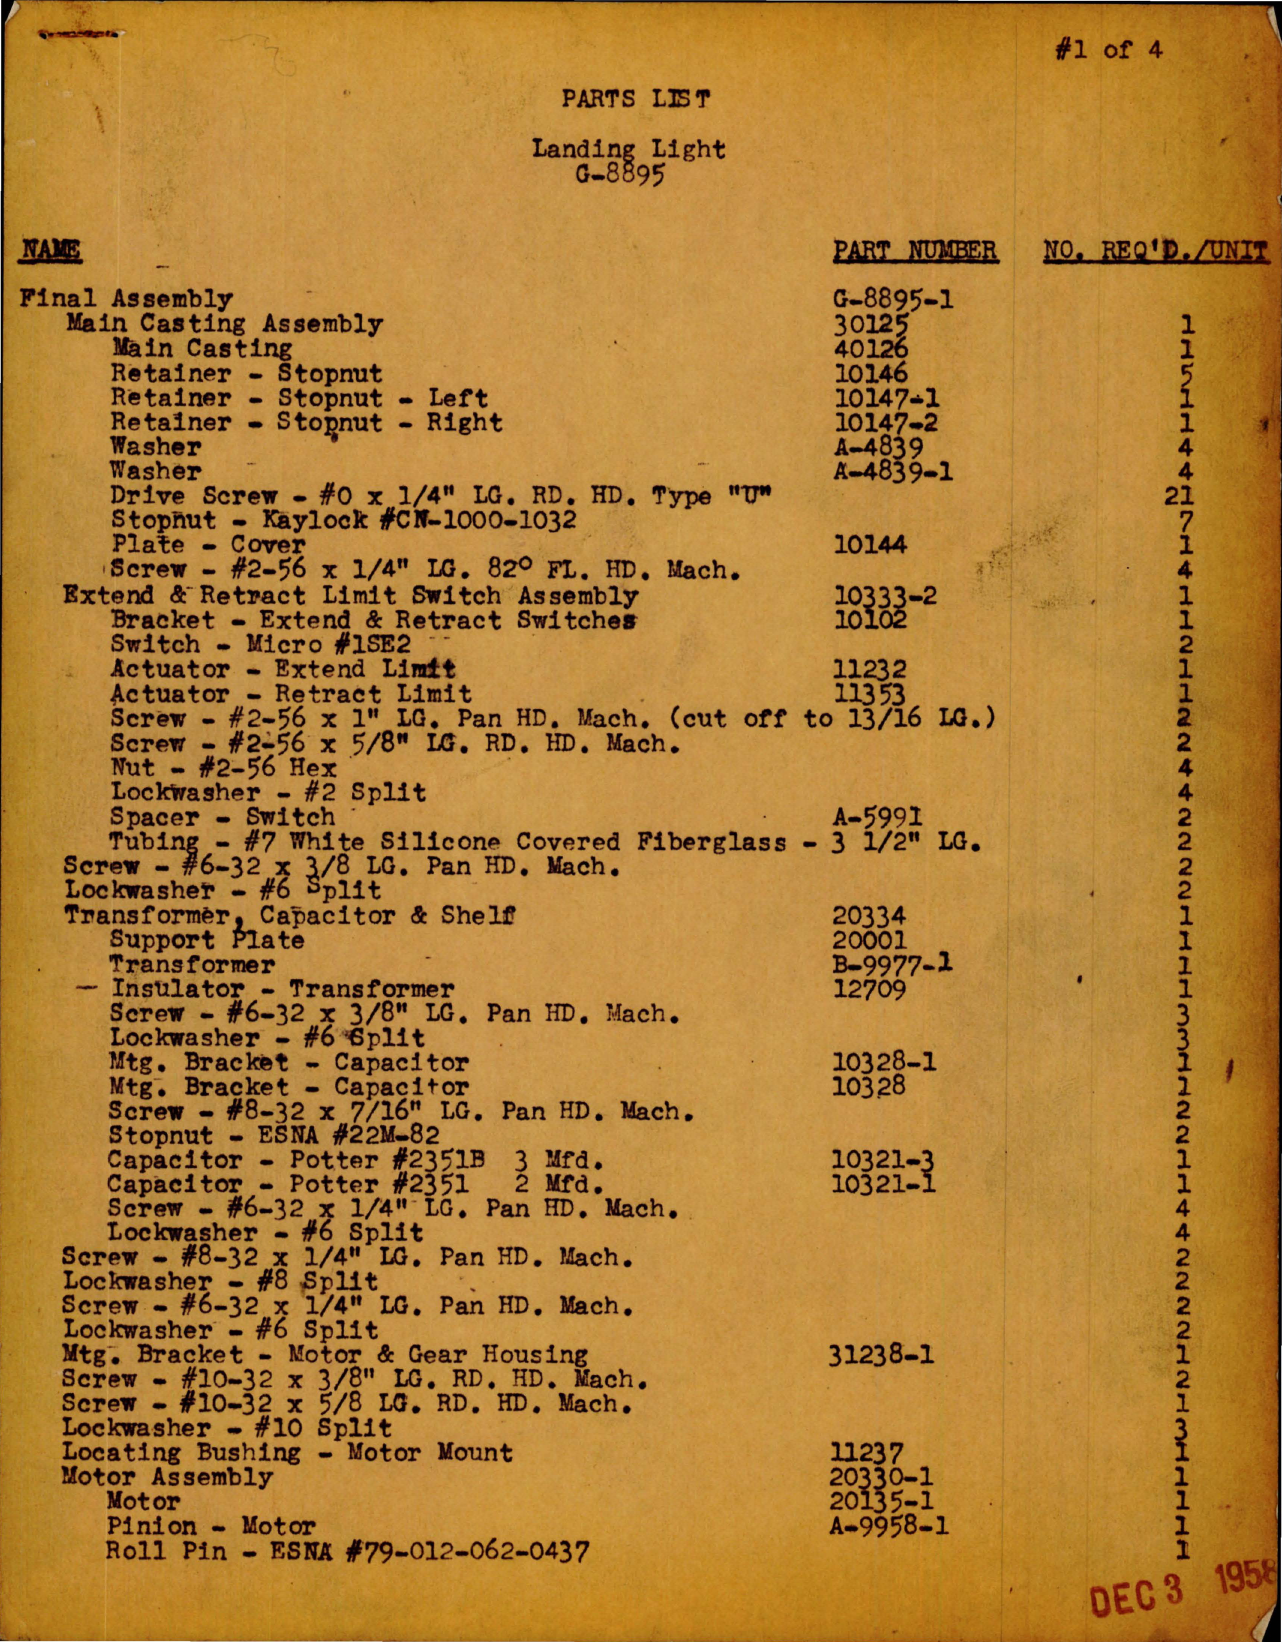 Sample page 1 from AirCorps Library document: Parts List for Landing Light - Part G-8895 